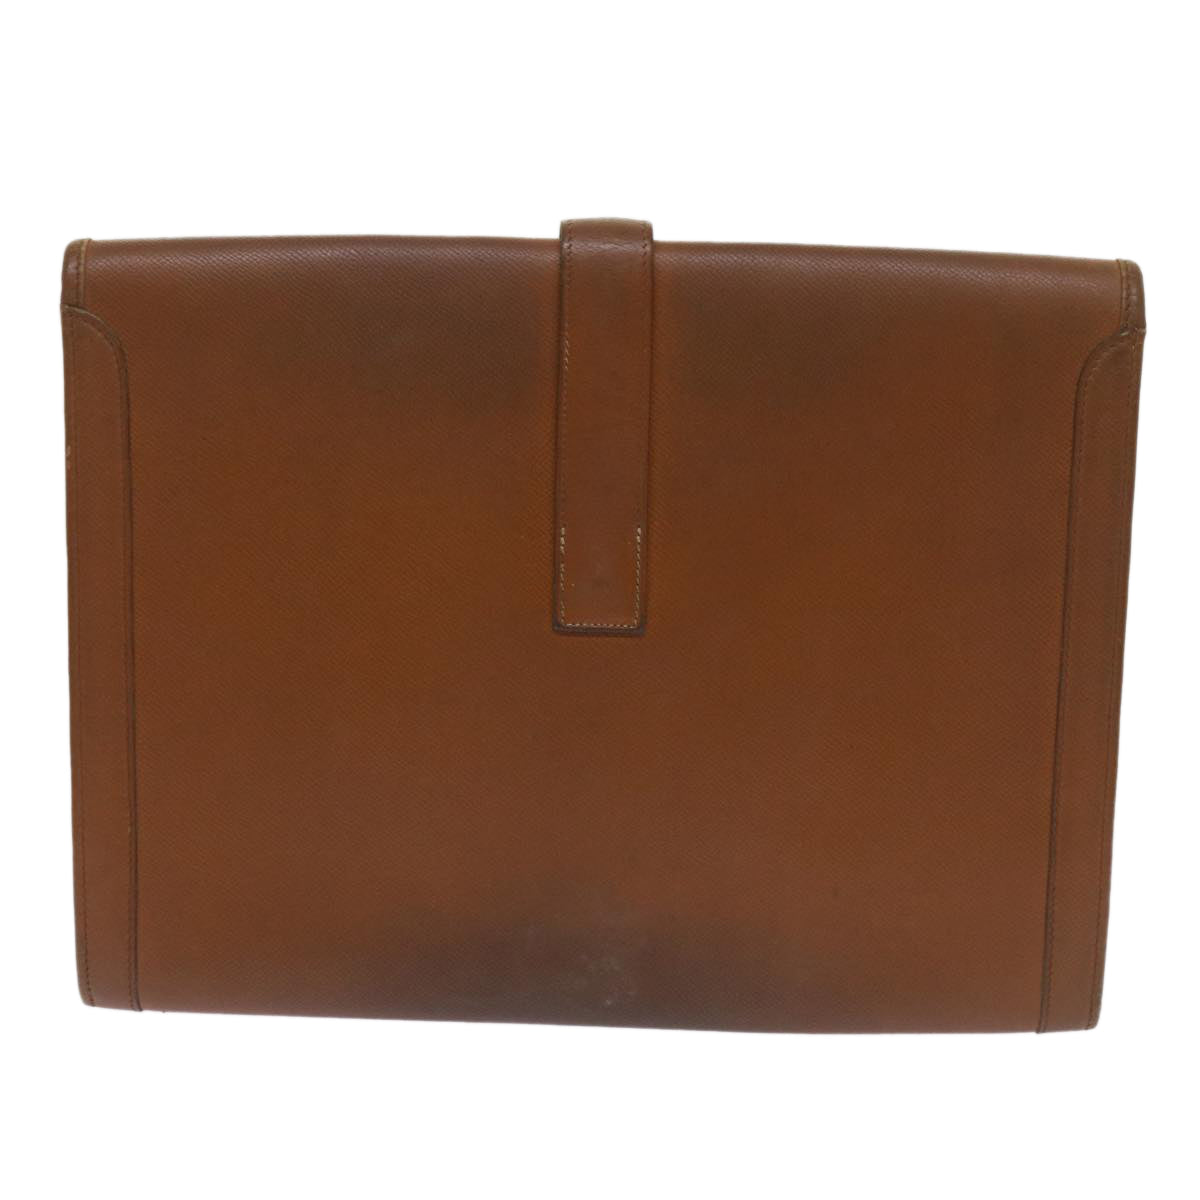 HERMES Clutch Bag Leather Brown Auth bs12425 - 0